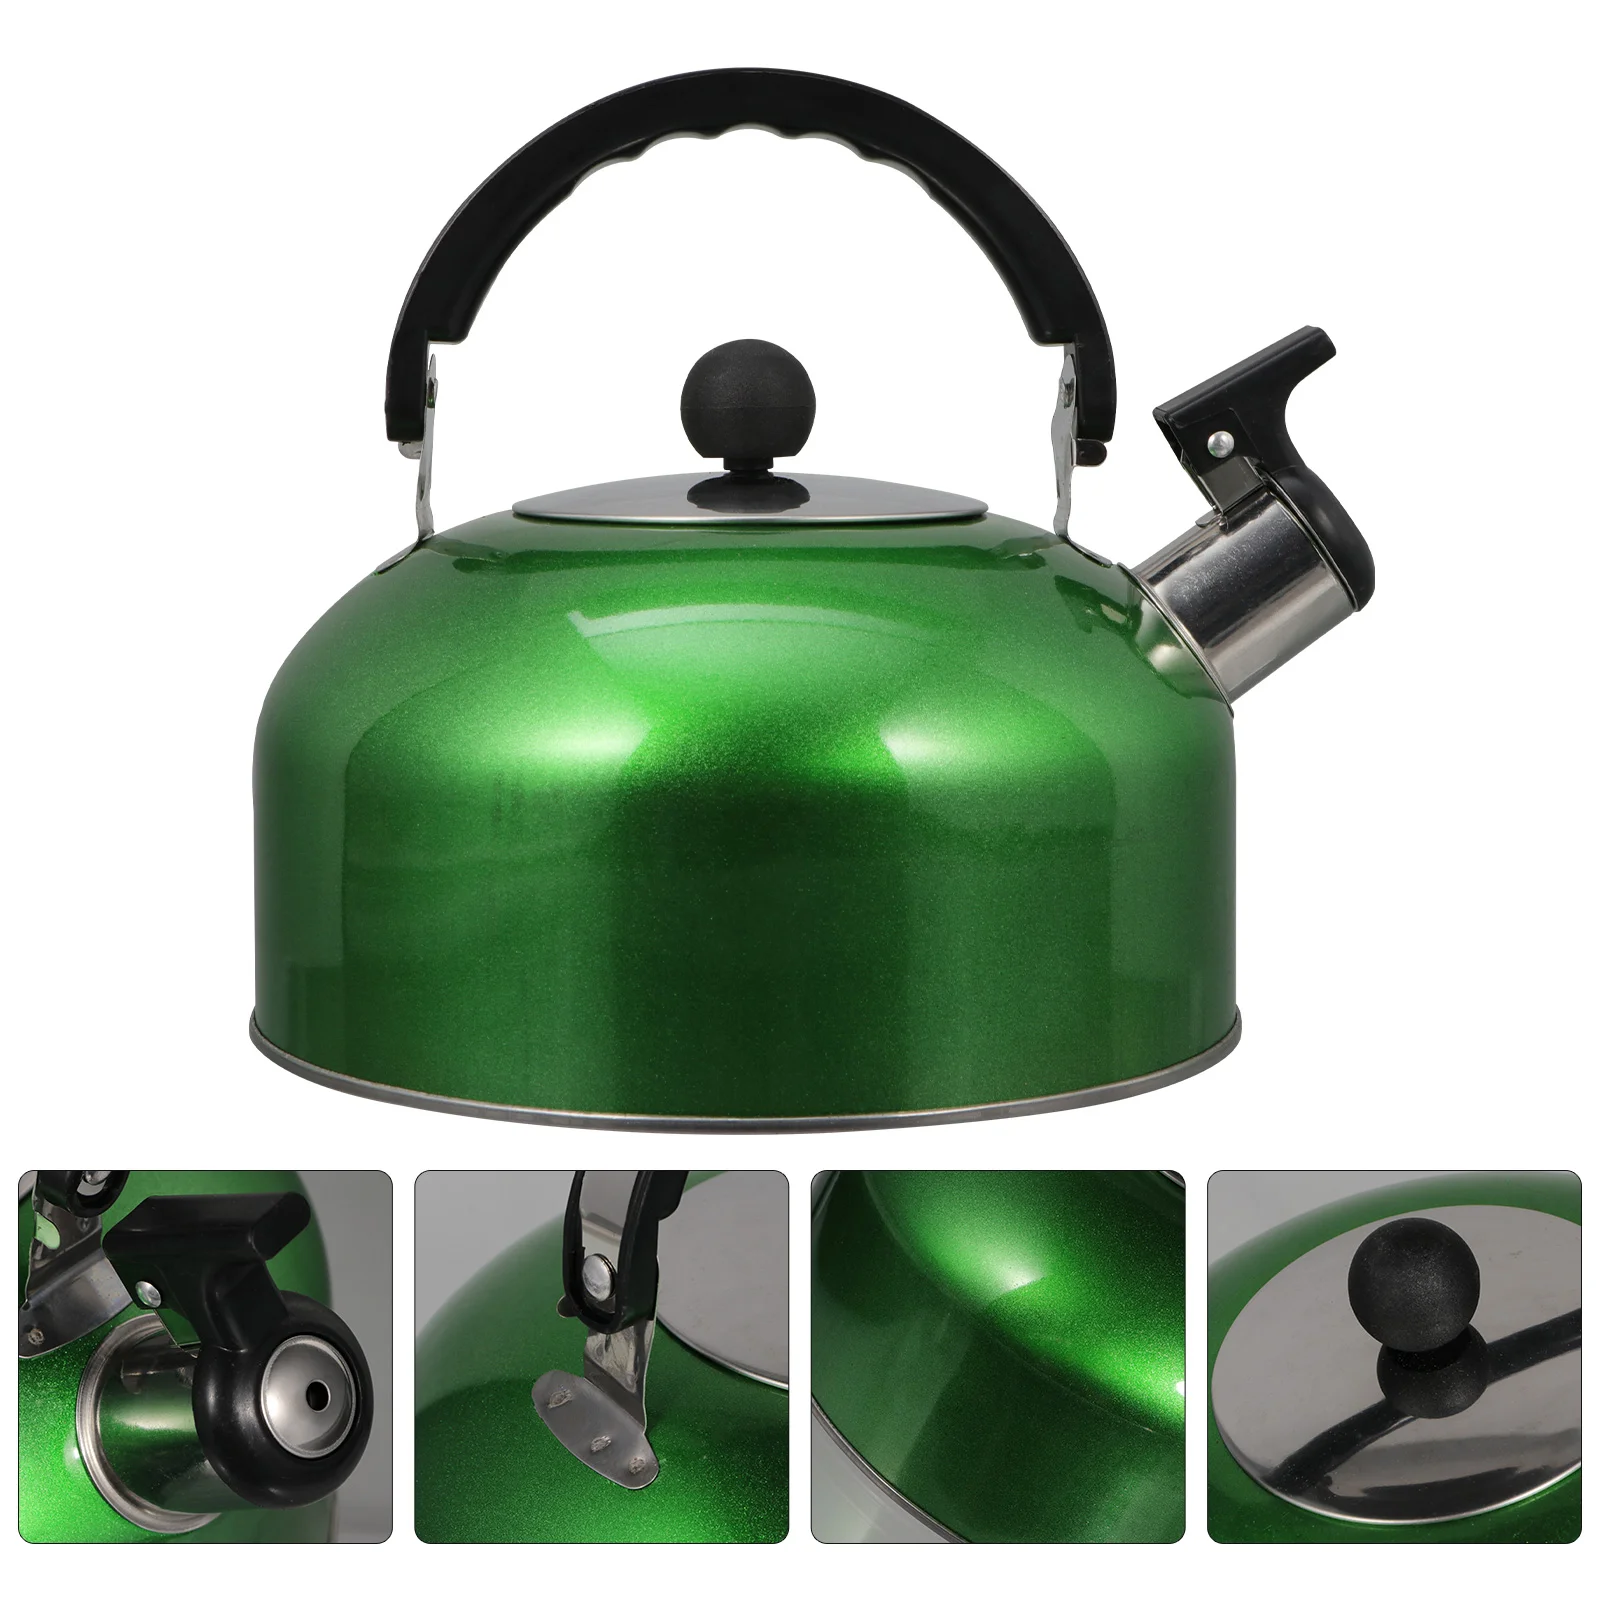 

Kettle Tea Whistling Stovetop Teapot Water Stove Steel Stainlesspotboiling Teakettle Gas Kettles Coffee Pitcher Pots Handle Hot